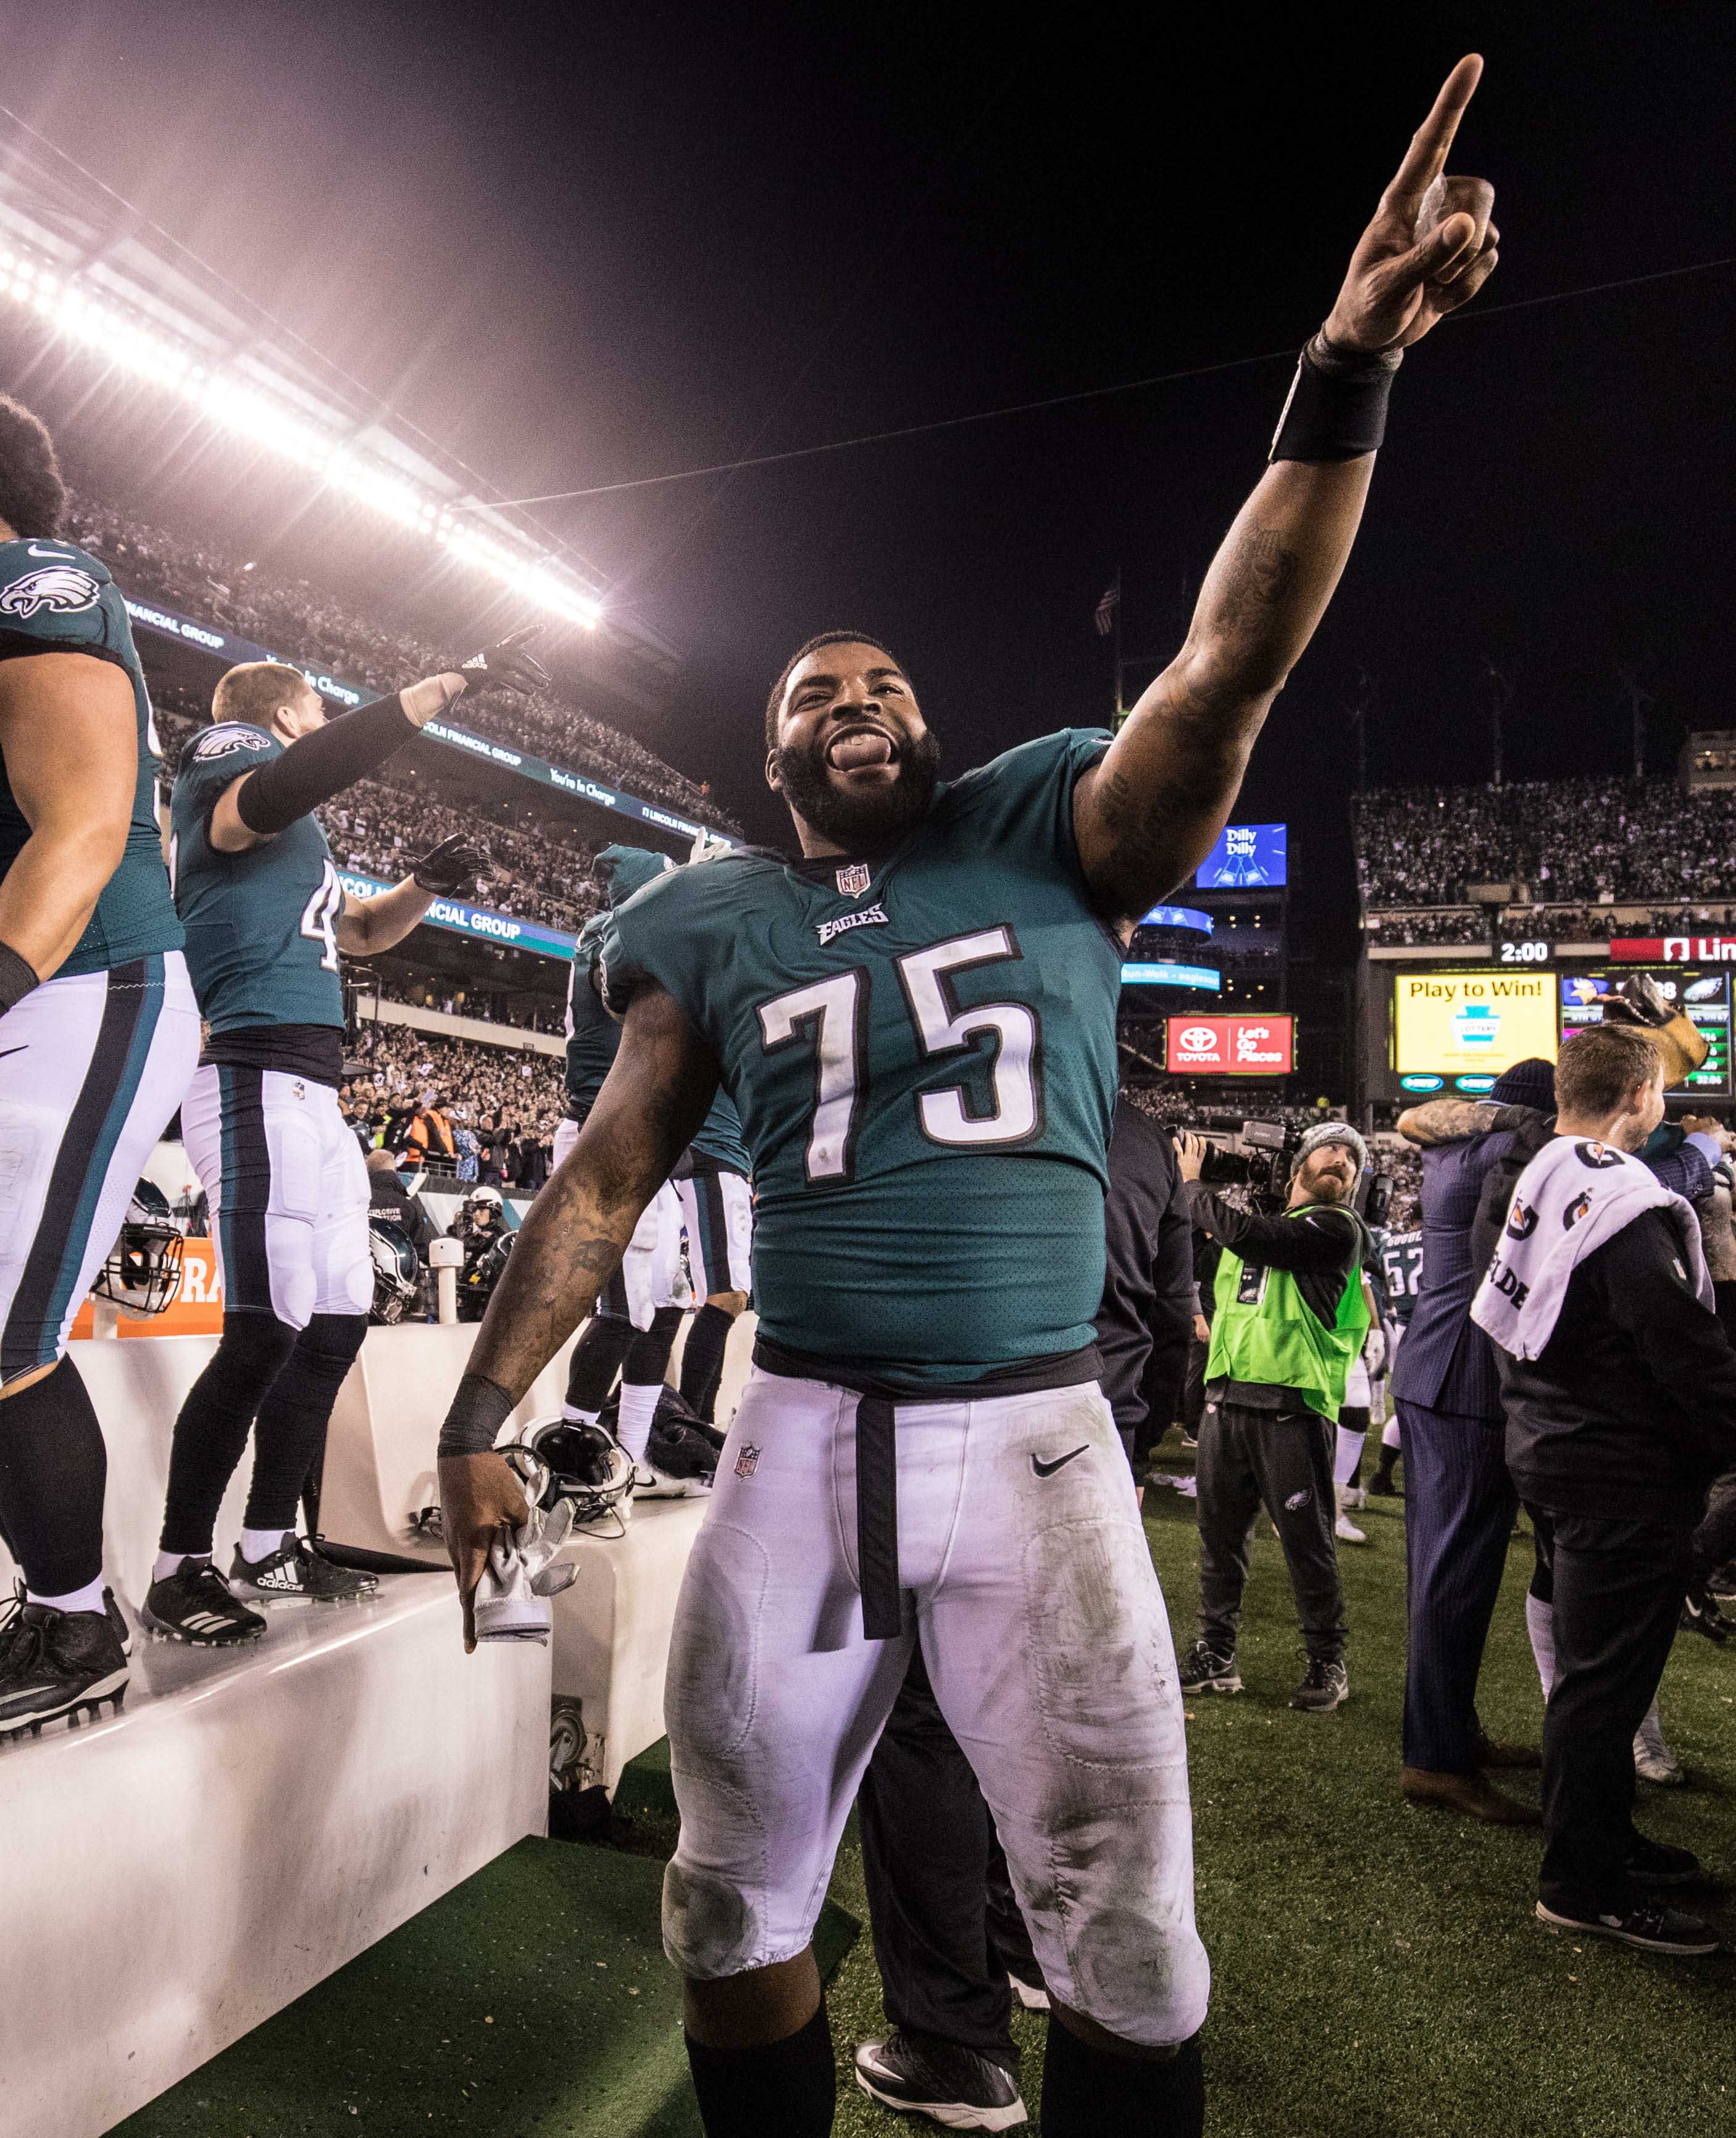 Vinny Curry returns to Eagles and couldn't be any happier – The Morning Call